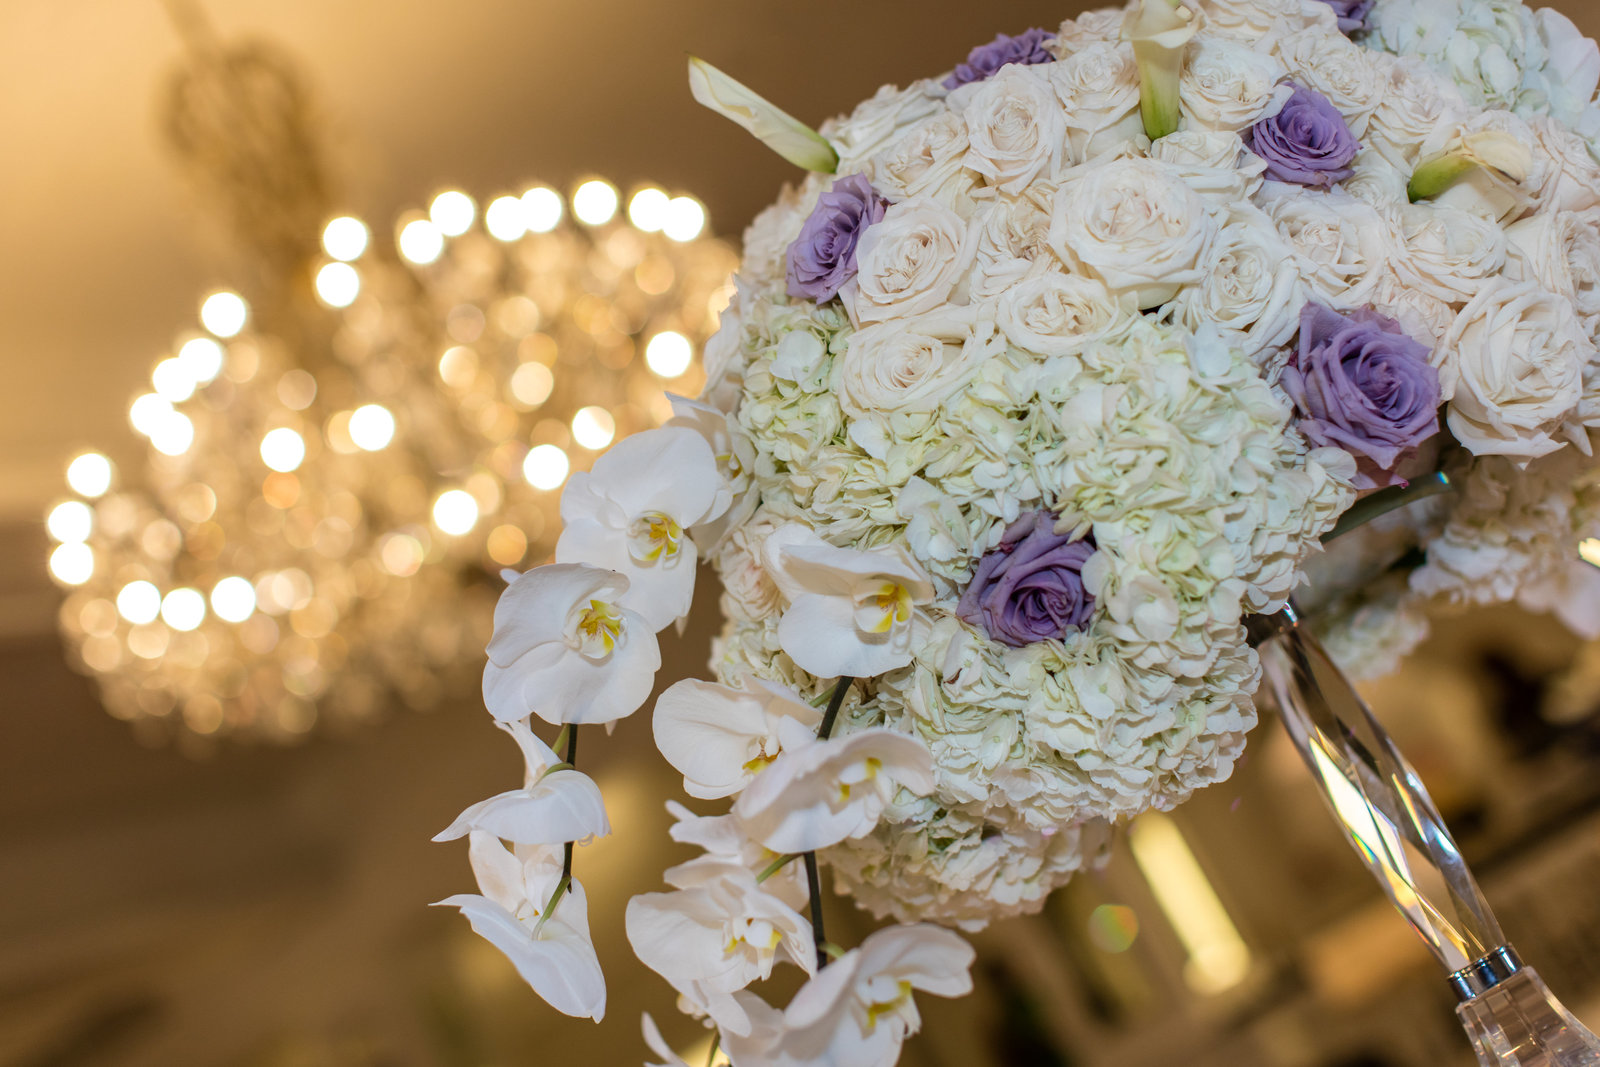 white hydrangeas, purple and ivory roses, lily